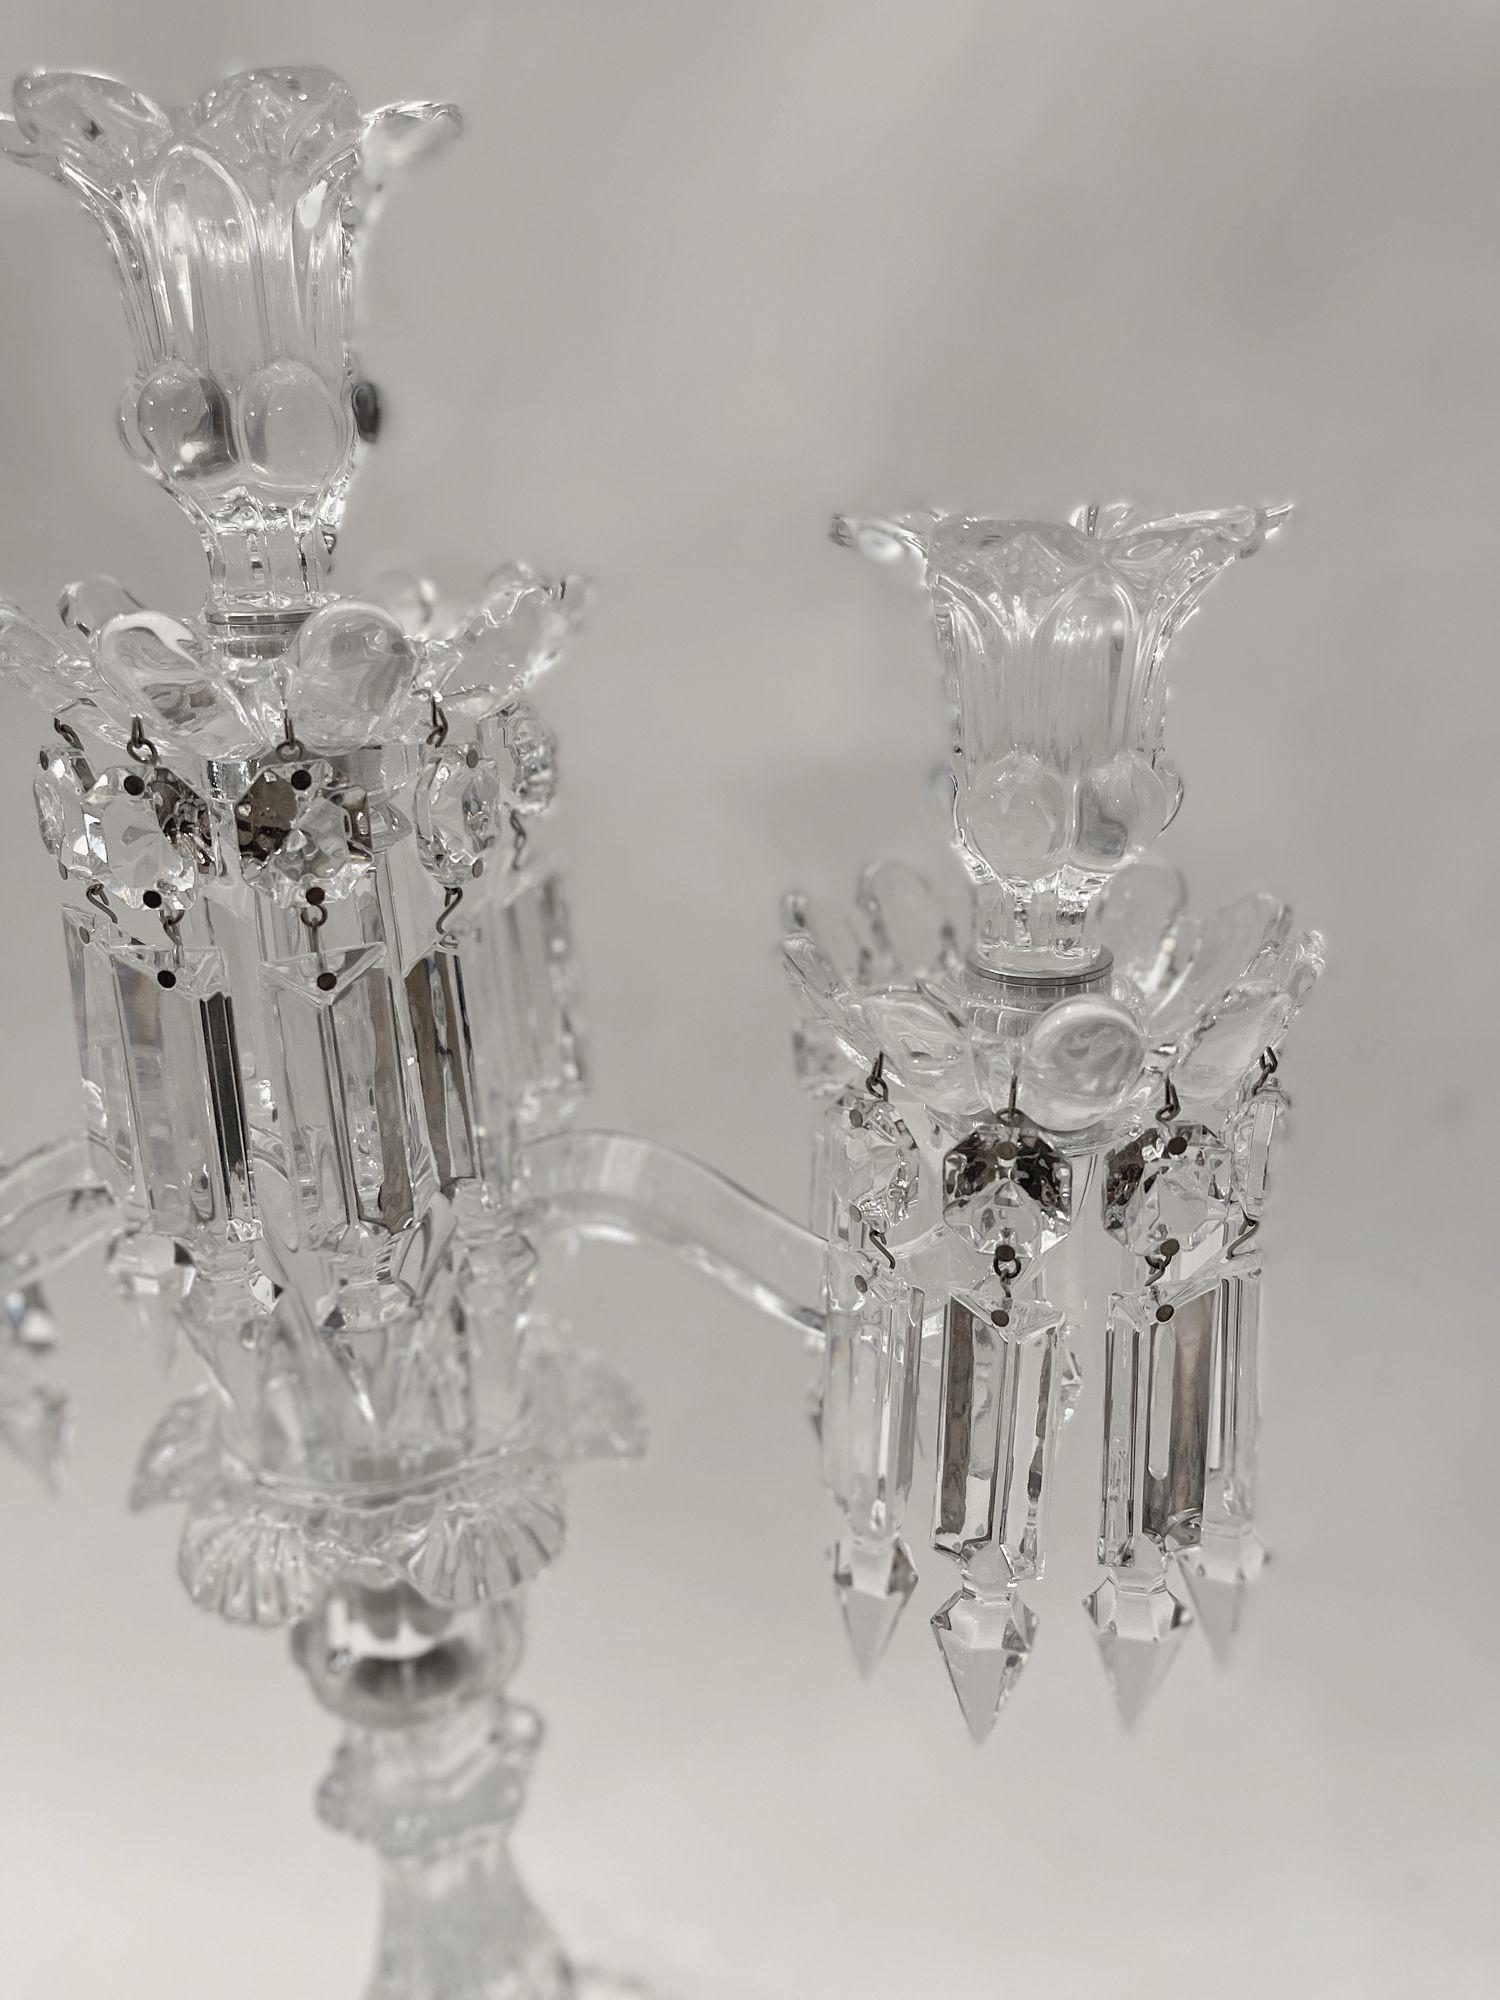 Contemporary Pair of Mid-Century Modern Neoclassical Glass Obelisk Candelabras by Baccarat For Sale